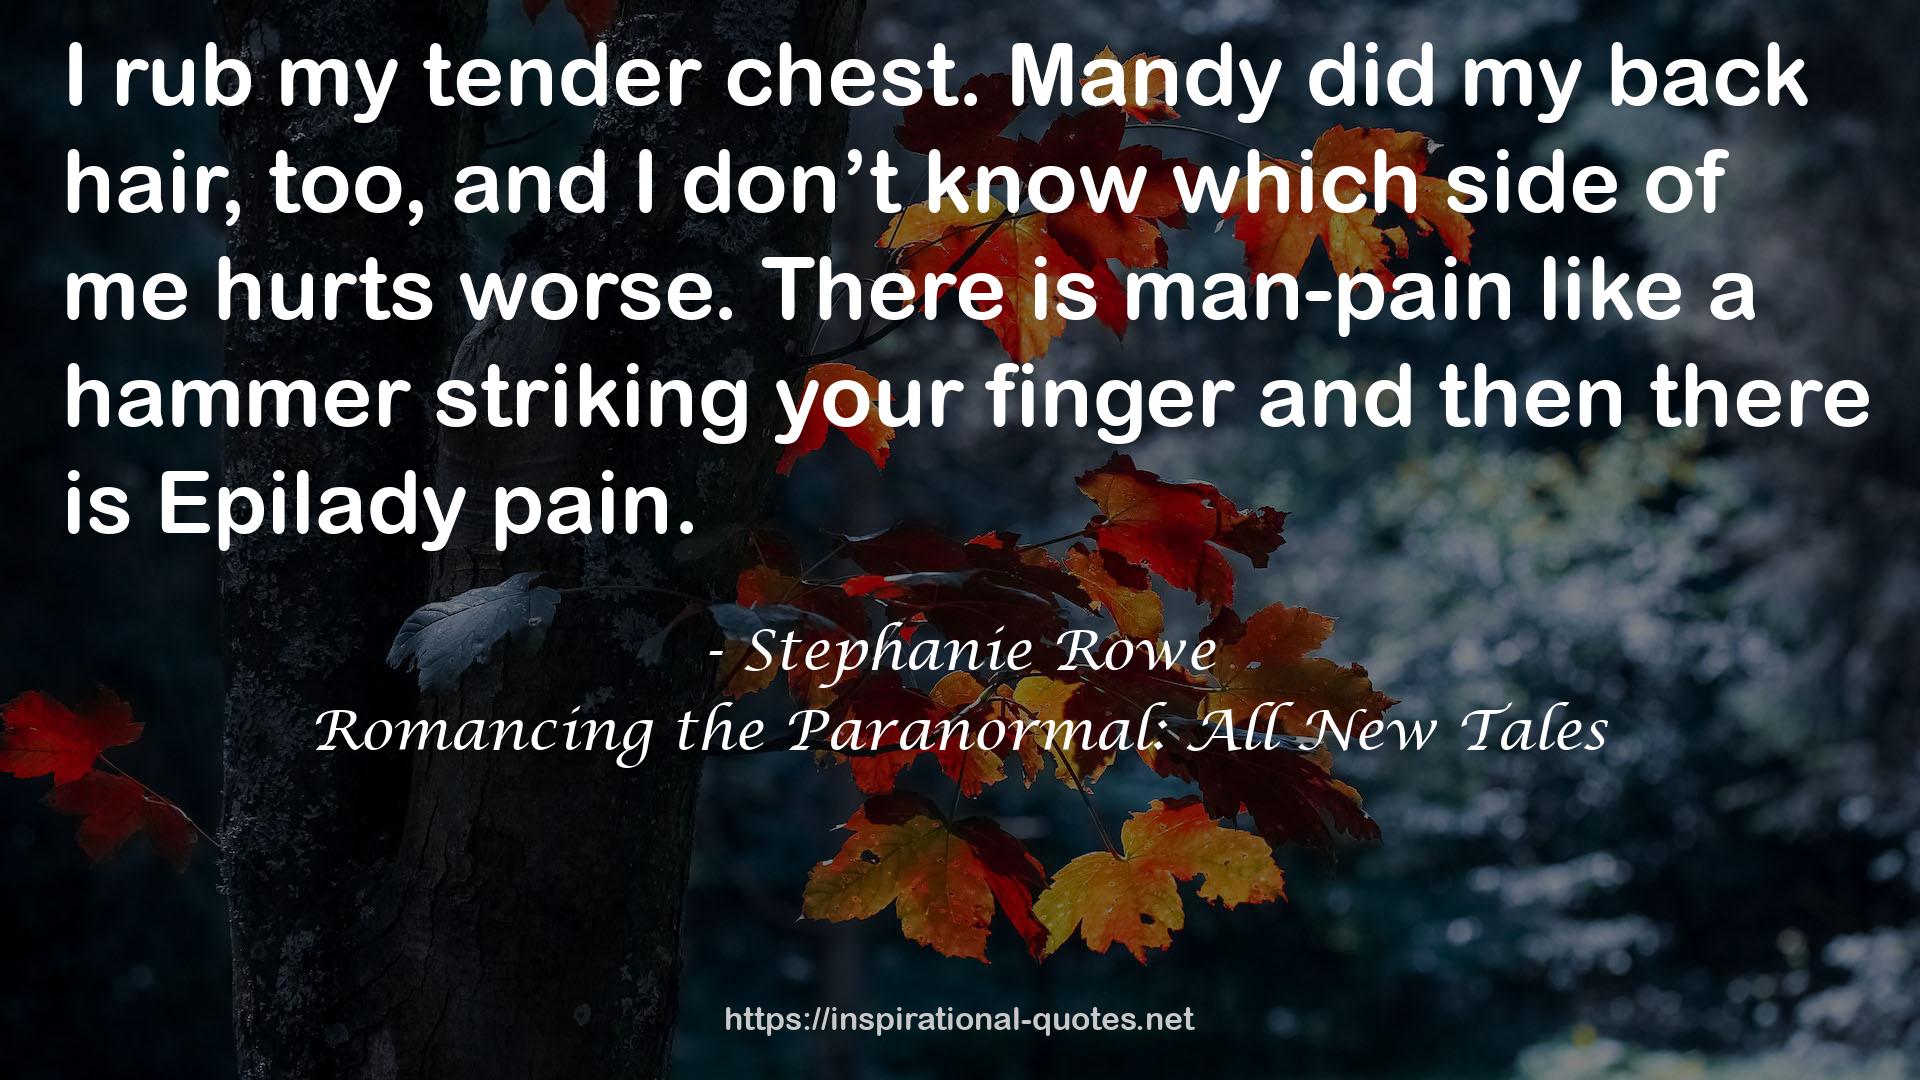 Romancing the Paranormal: All New Tales QUOTES